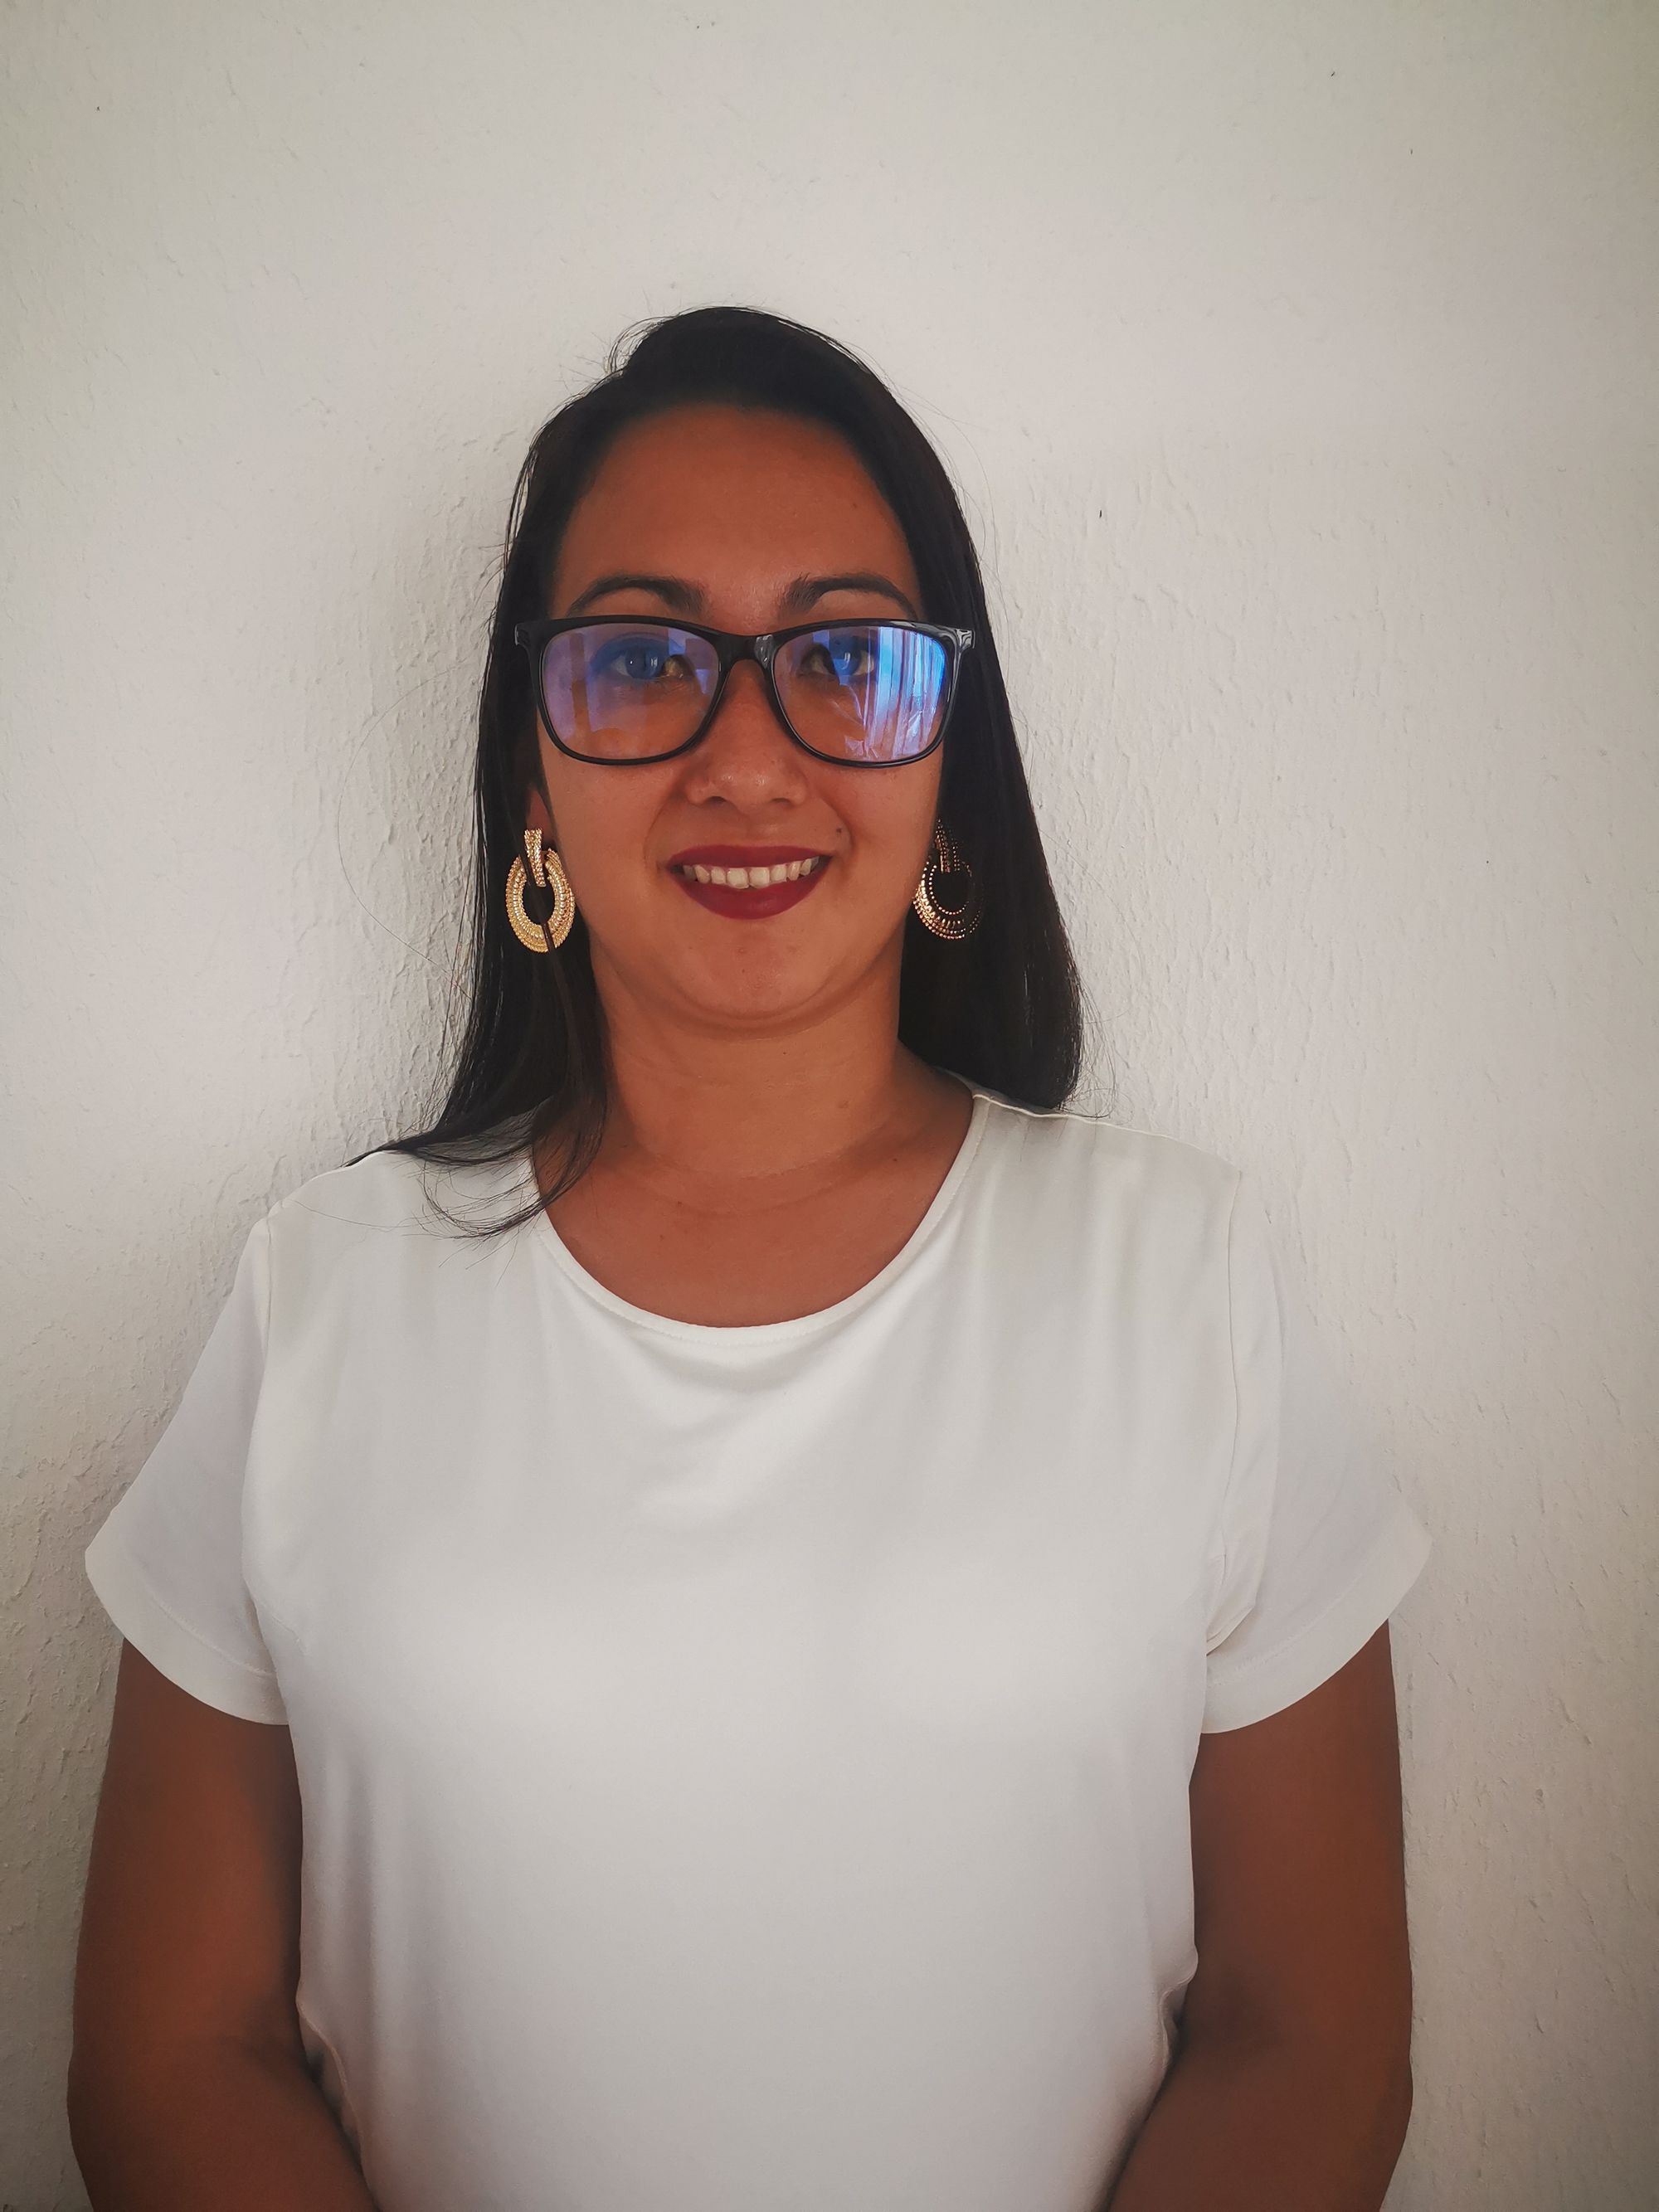 Meet Ursula, one of our amazing Spanish teachers from El Salvador!